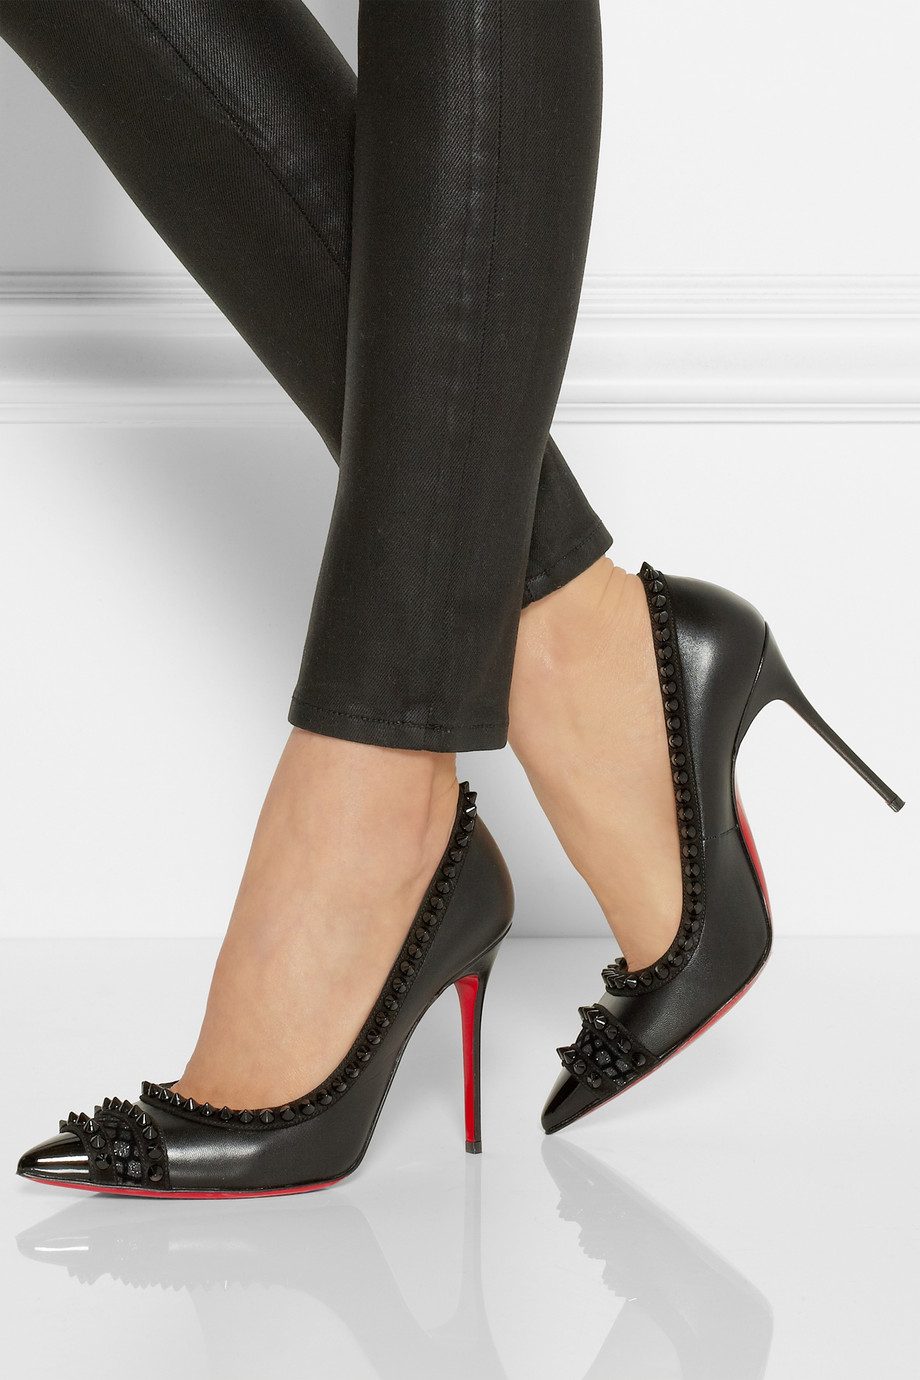 Lyst - Christian Louboutin Malabar Hill 100 Spiked Leather Pumps in Black